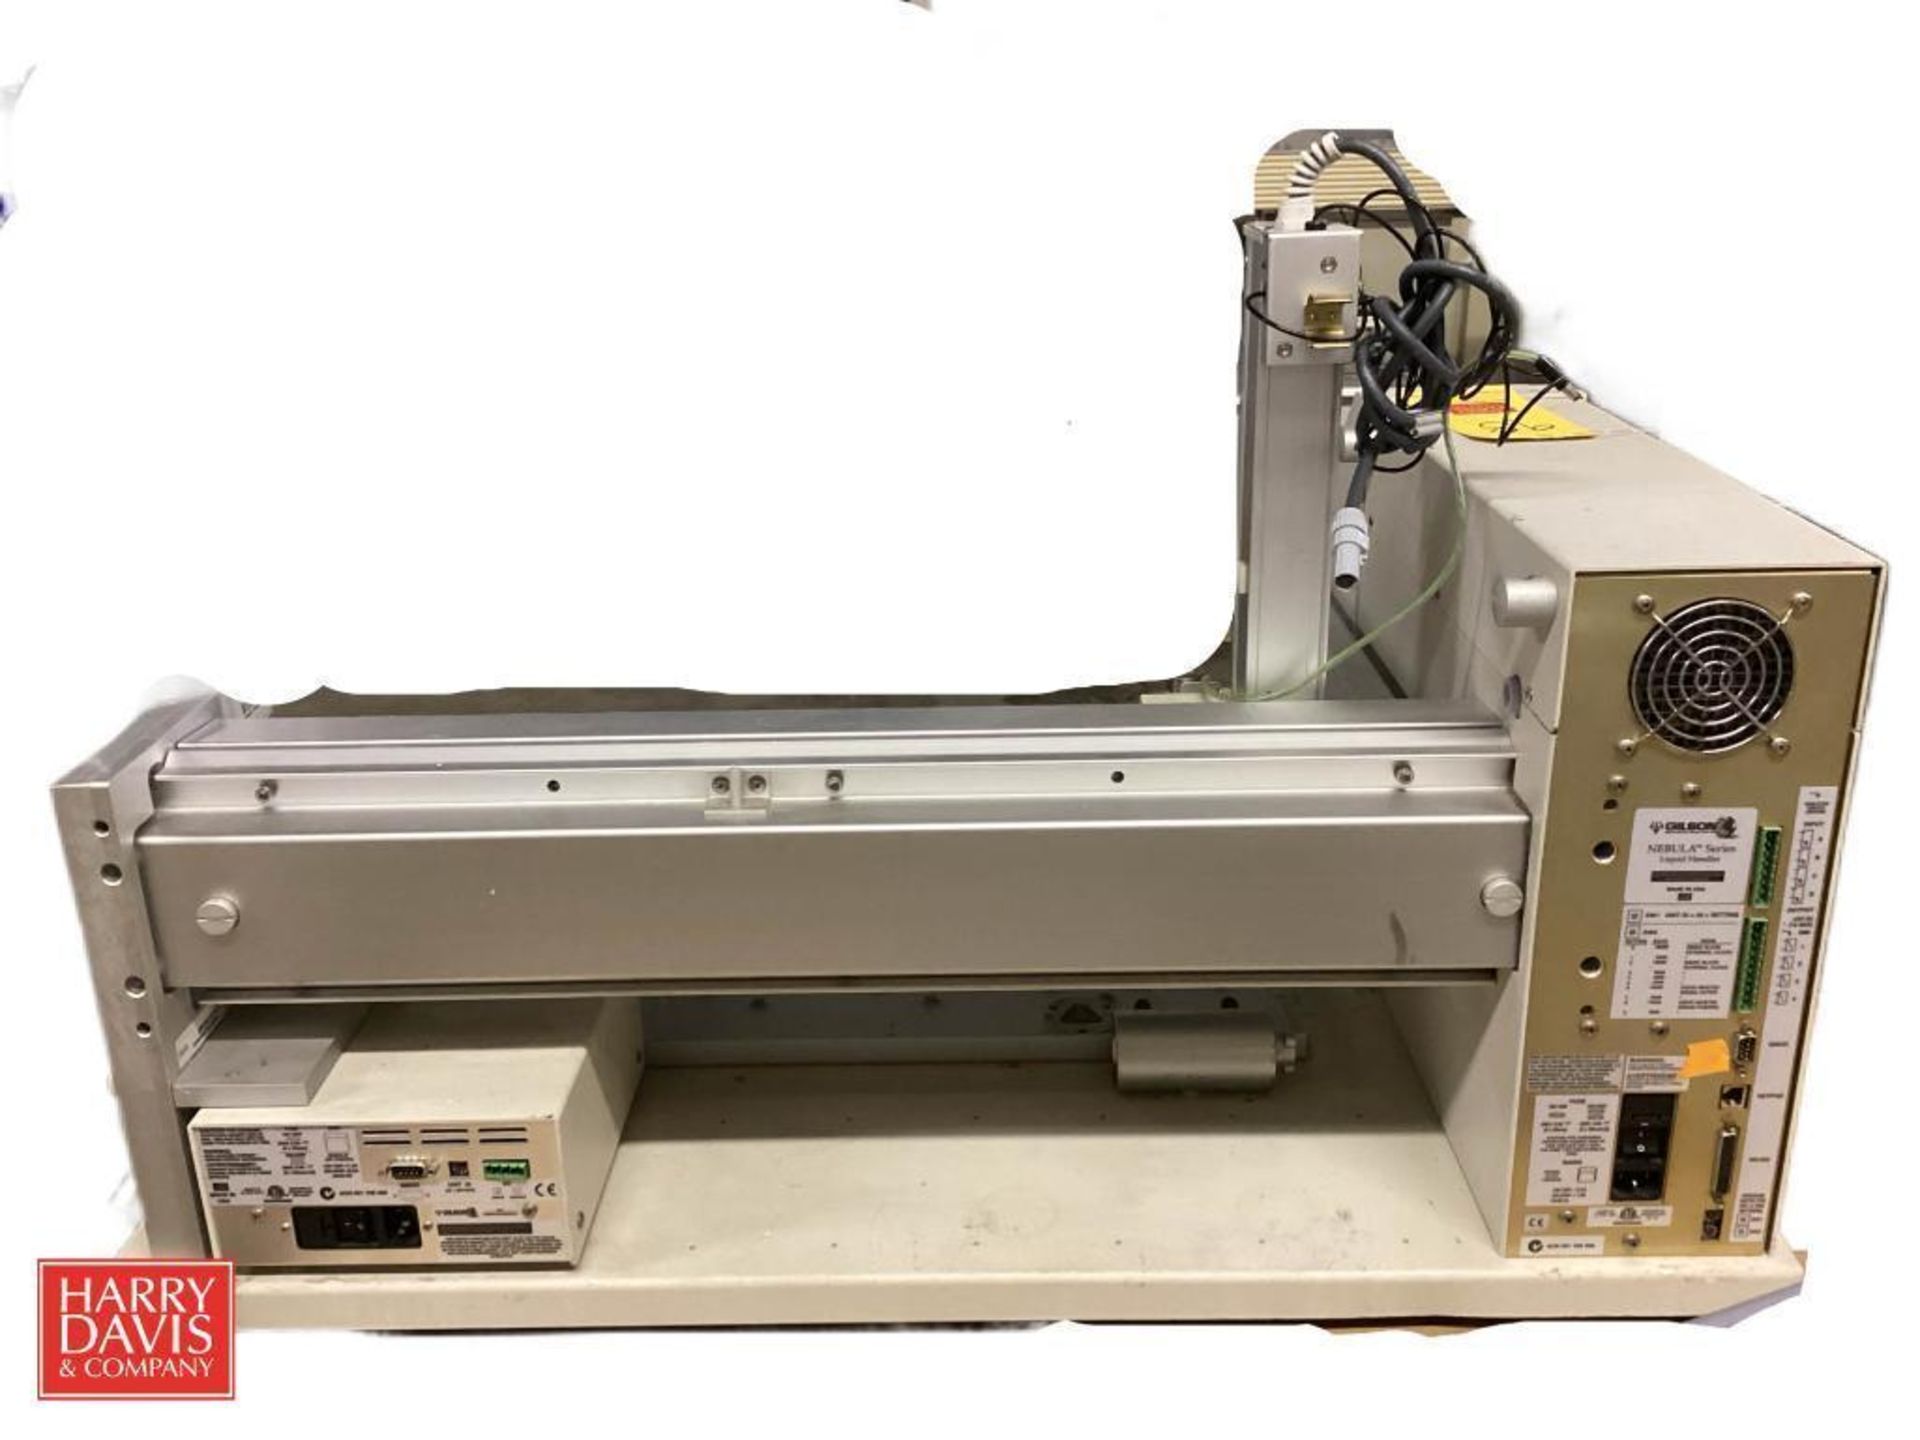 Gilson 215 Liquid Handler with Models 515, 811C, 306, 819 and UV/VIS-155 - Image 3 of 8